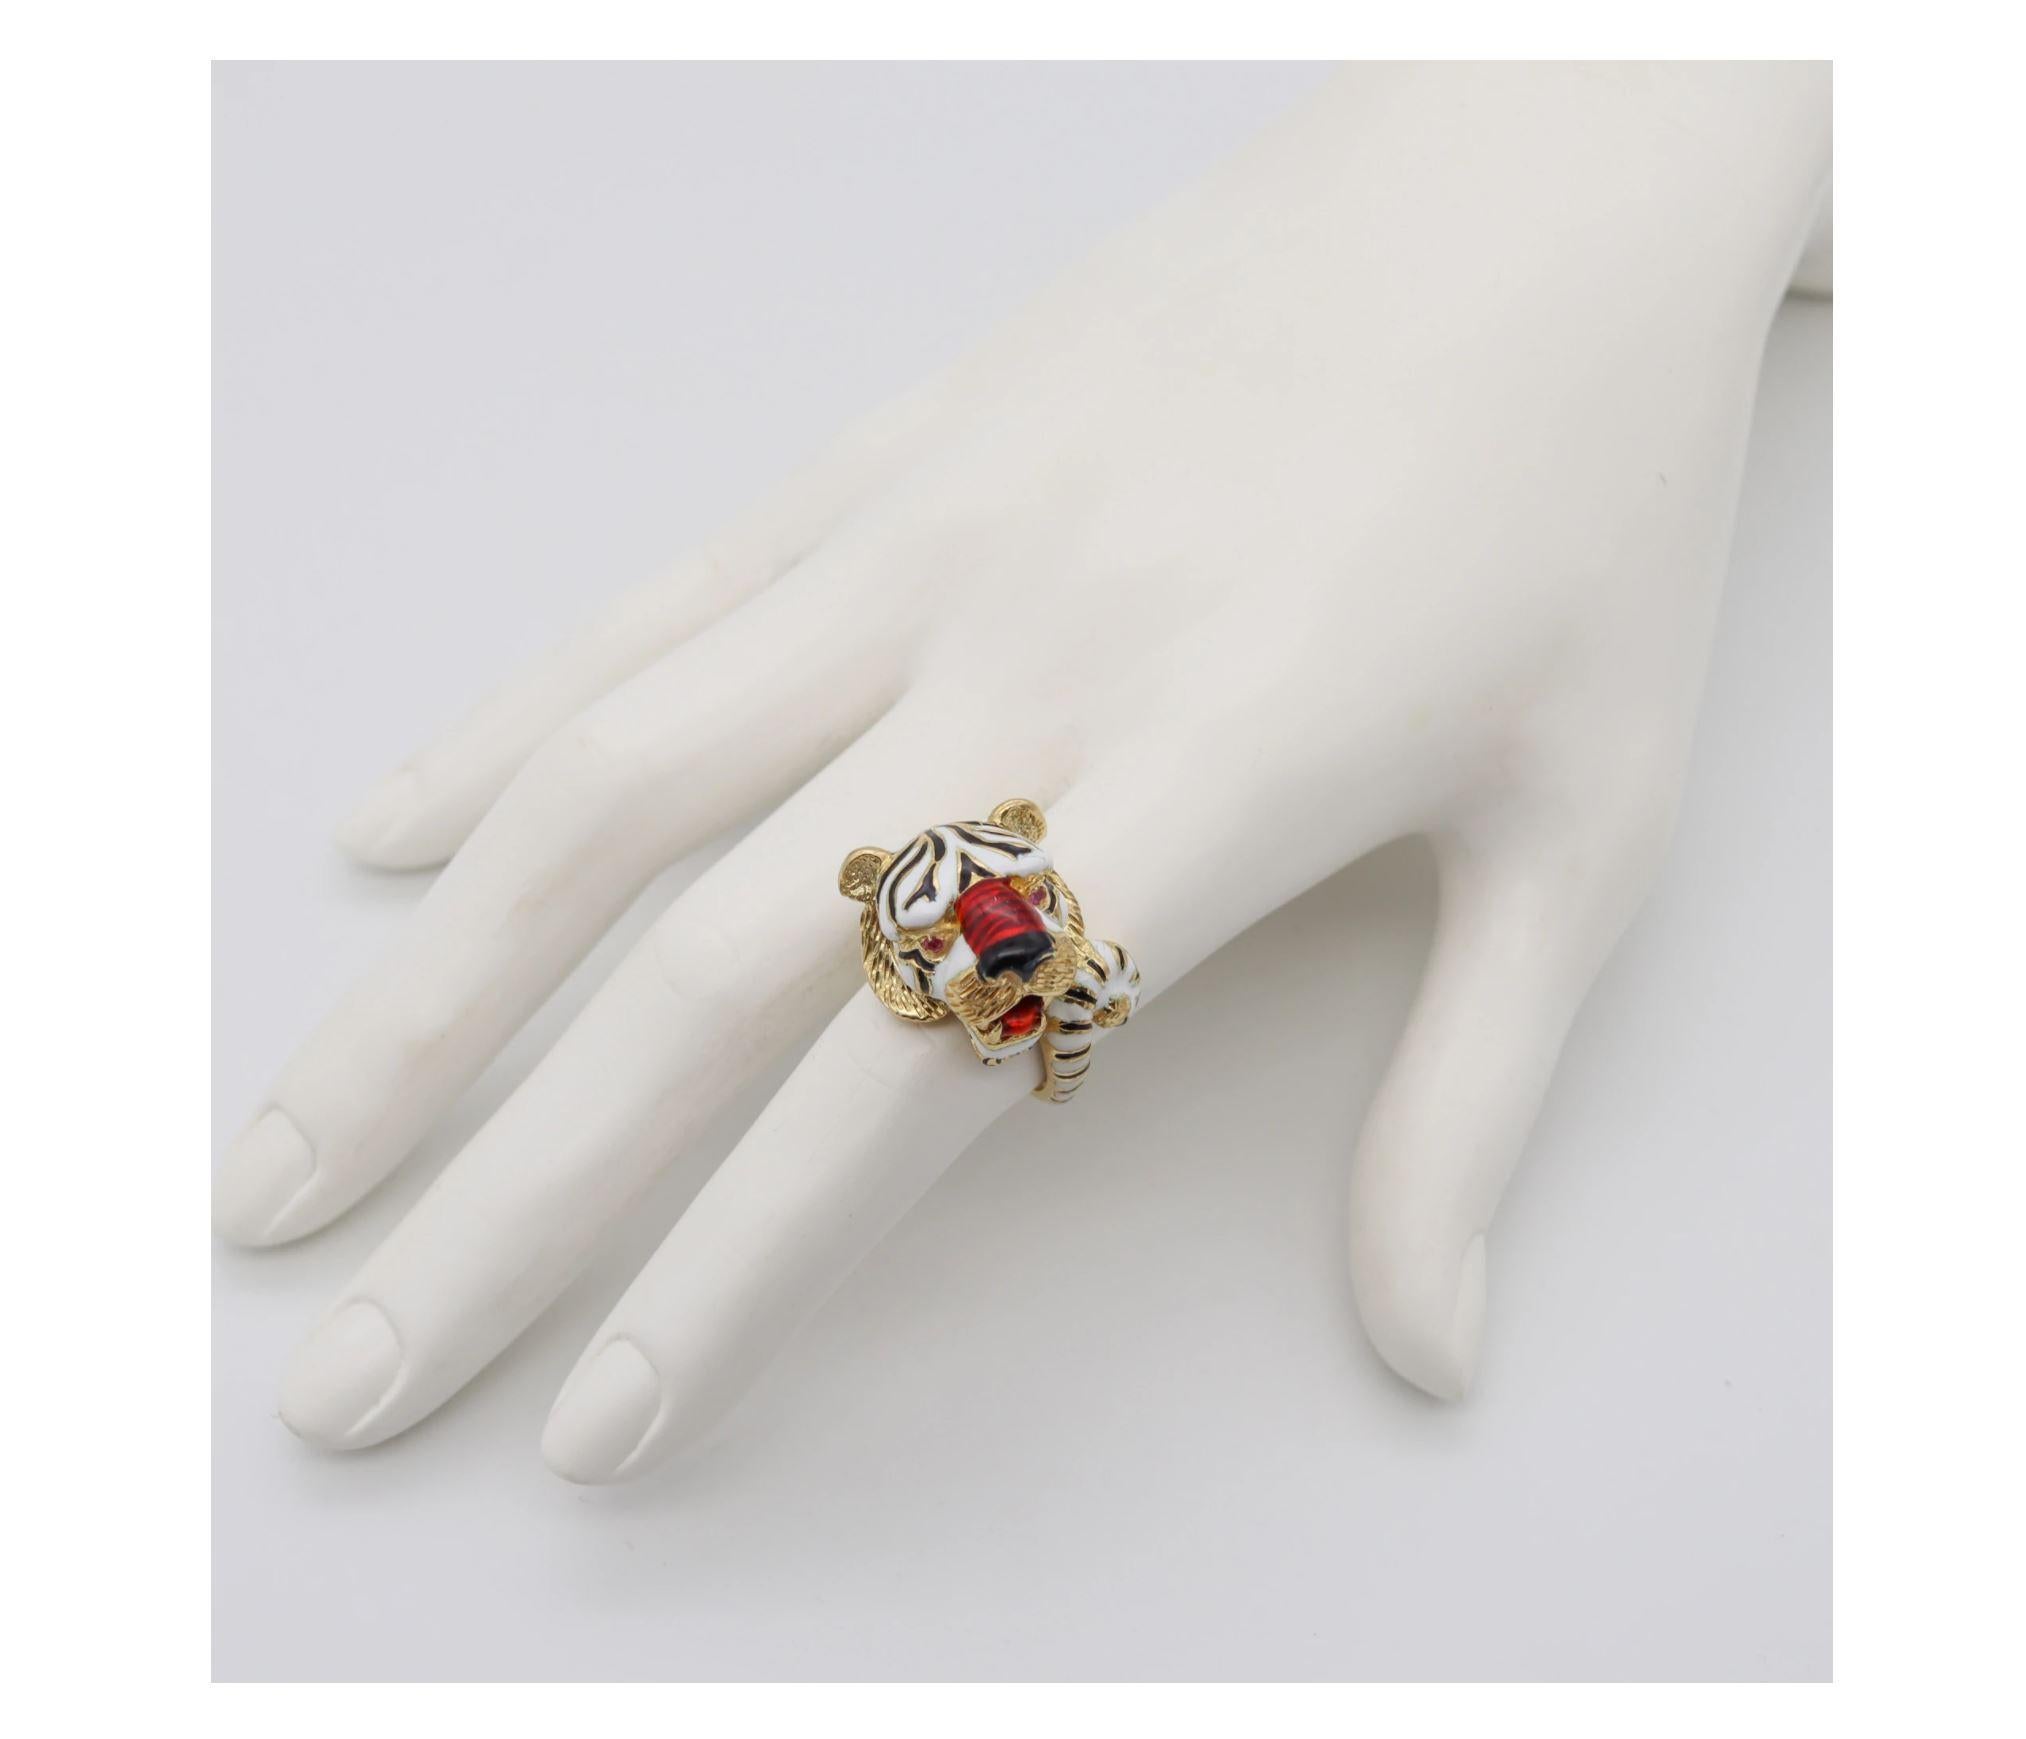 Frascarolo Milano Enameled Tiger Cocktail Ring in 18Kt Yellow Gold with Rubies 2